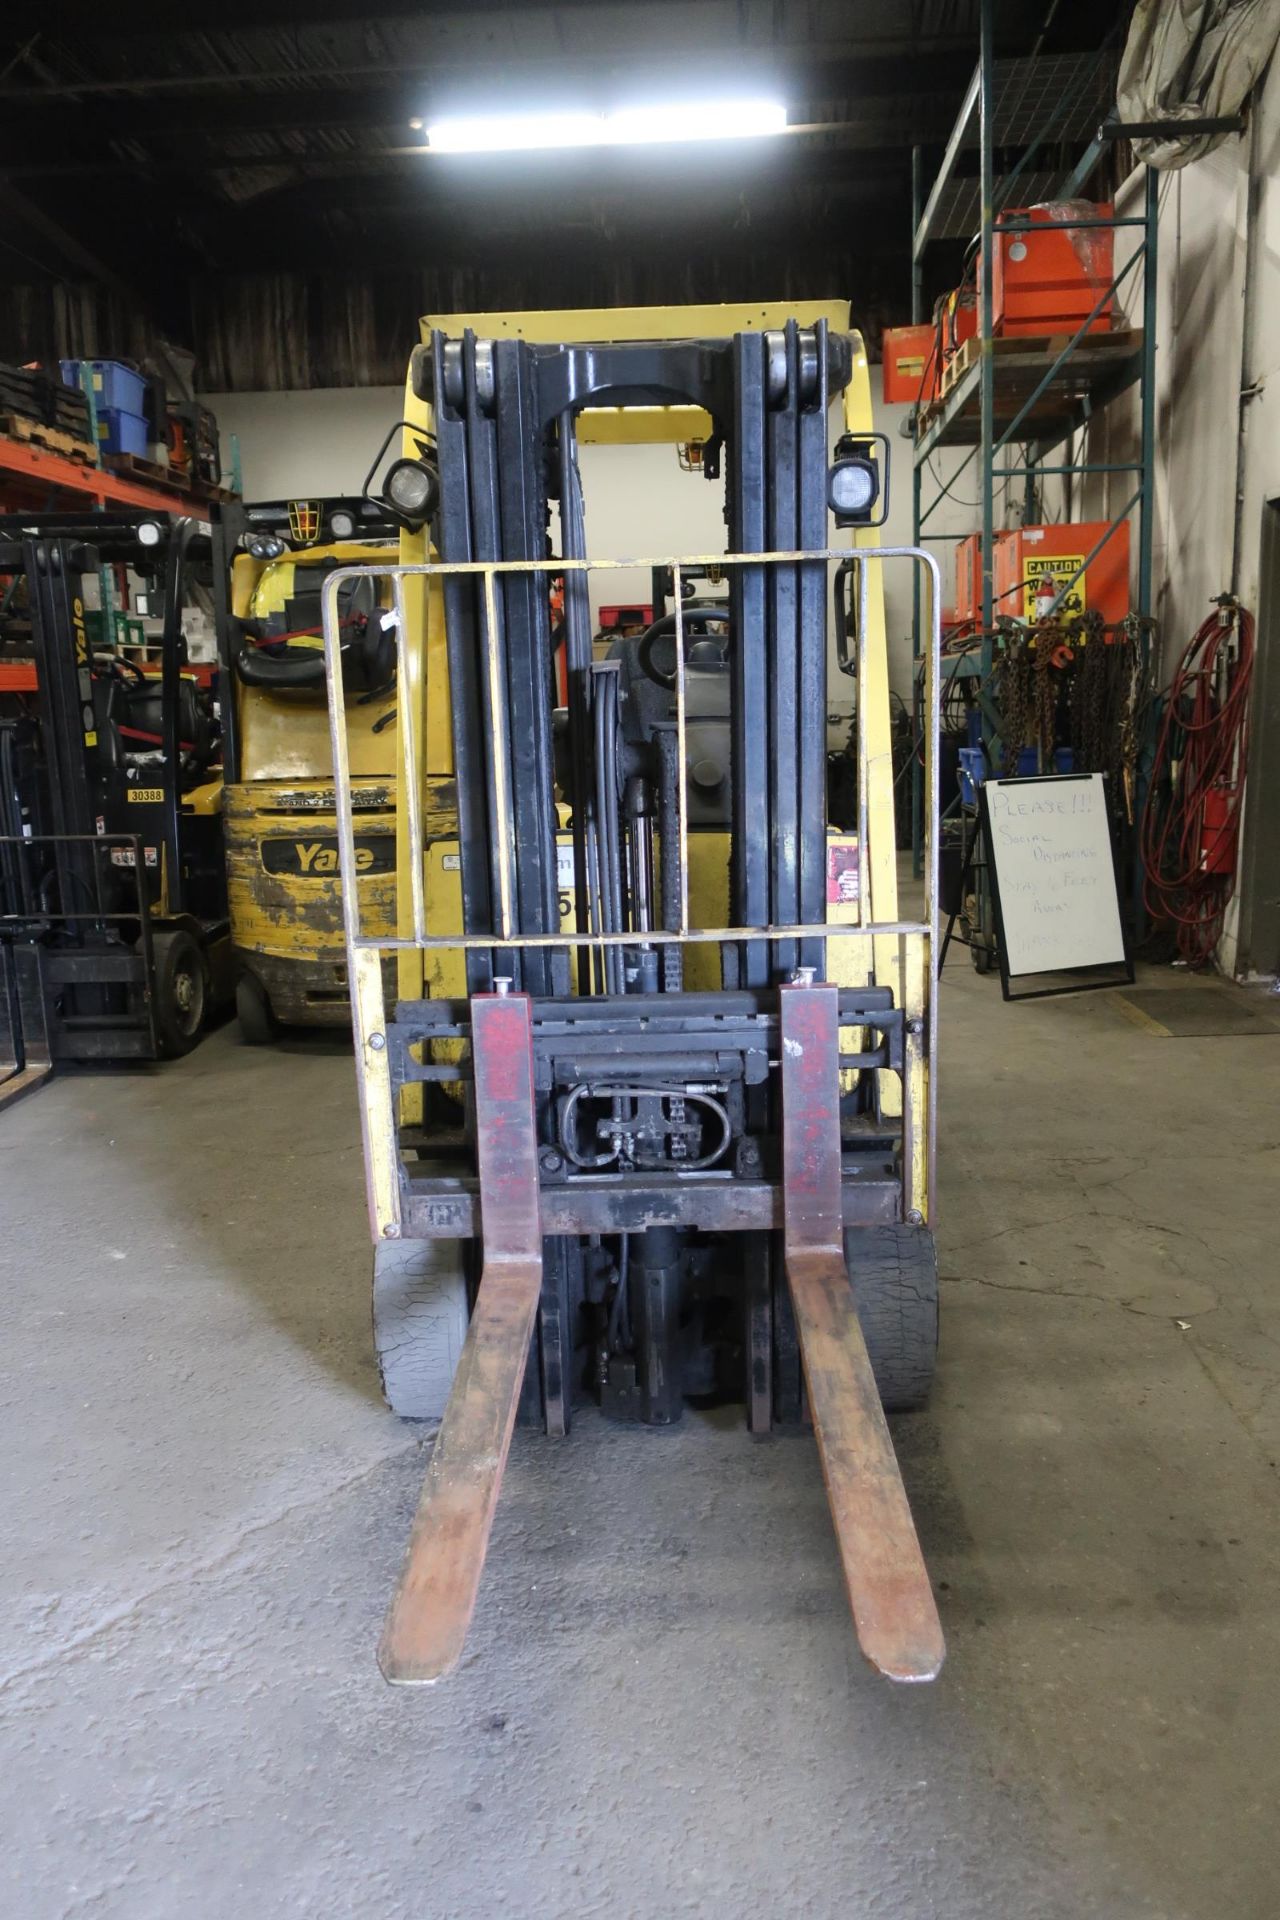 FREE CUSTOMS - 2012 Hyster 5000lbs Capacity Forklift with 3-stage mast - electric with charger - Image 2 of 2